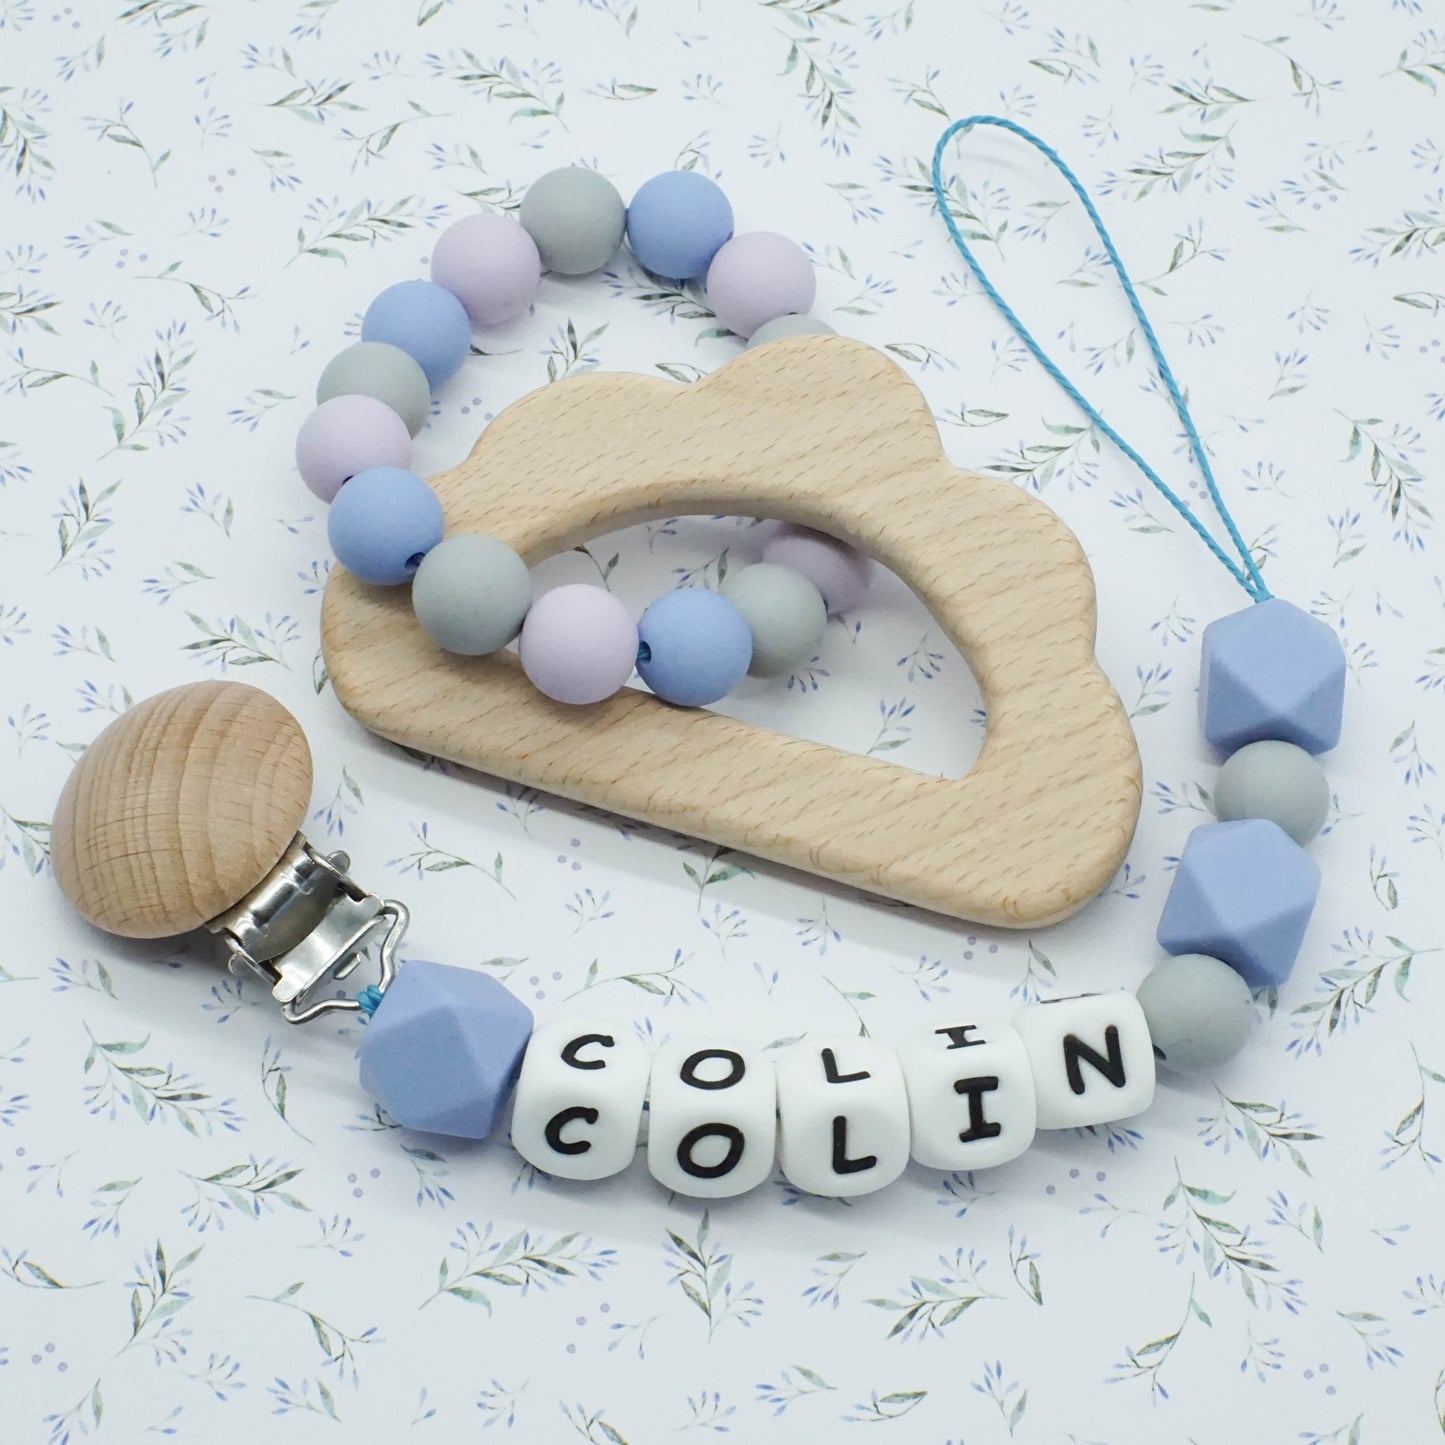 Pacifier Clip & Teether - COLIN